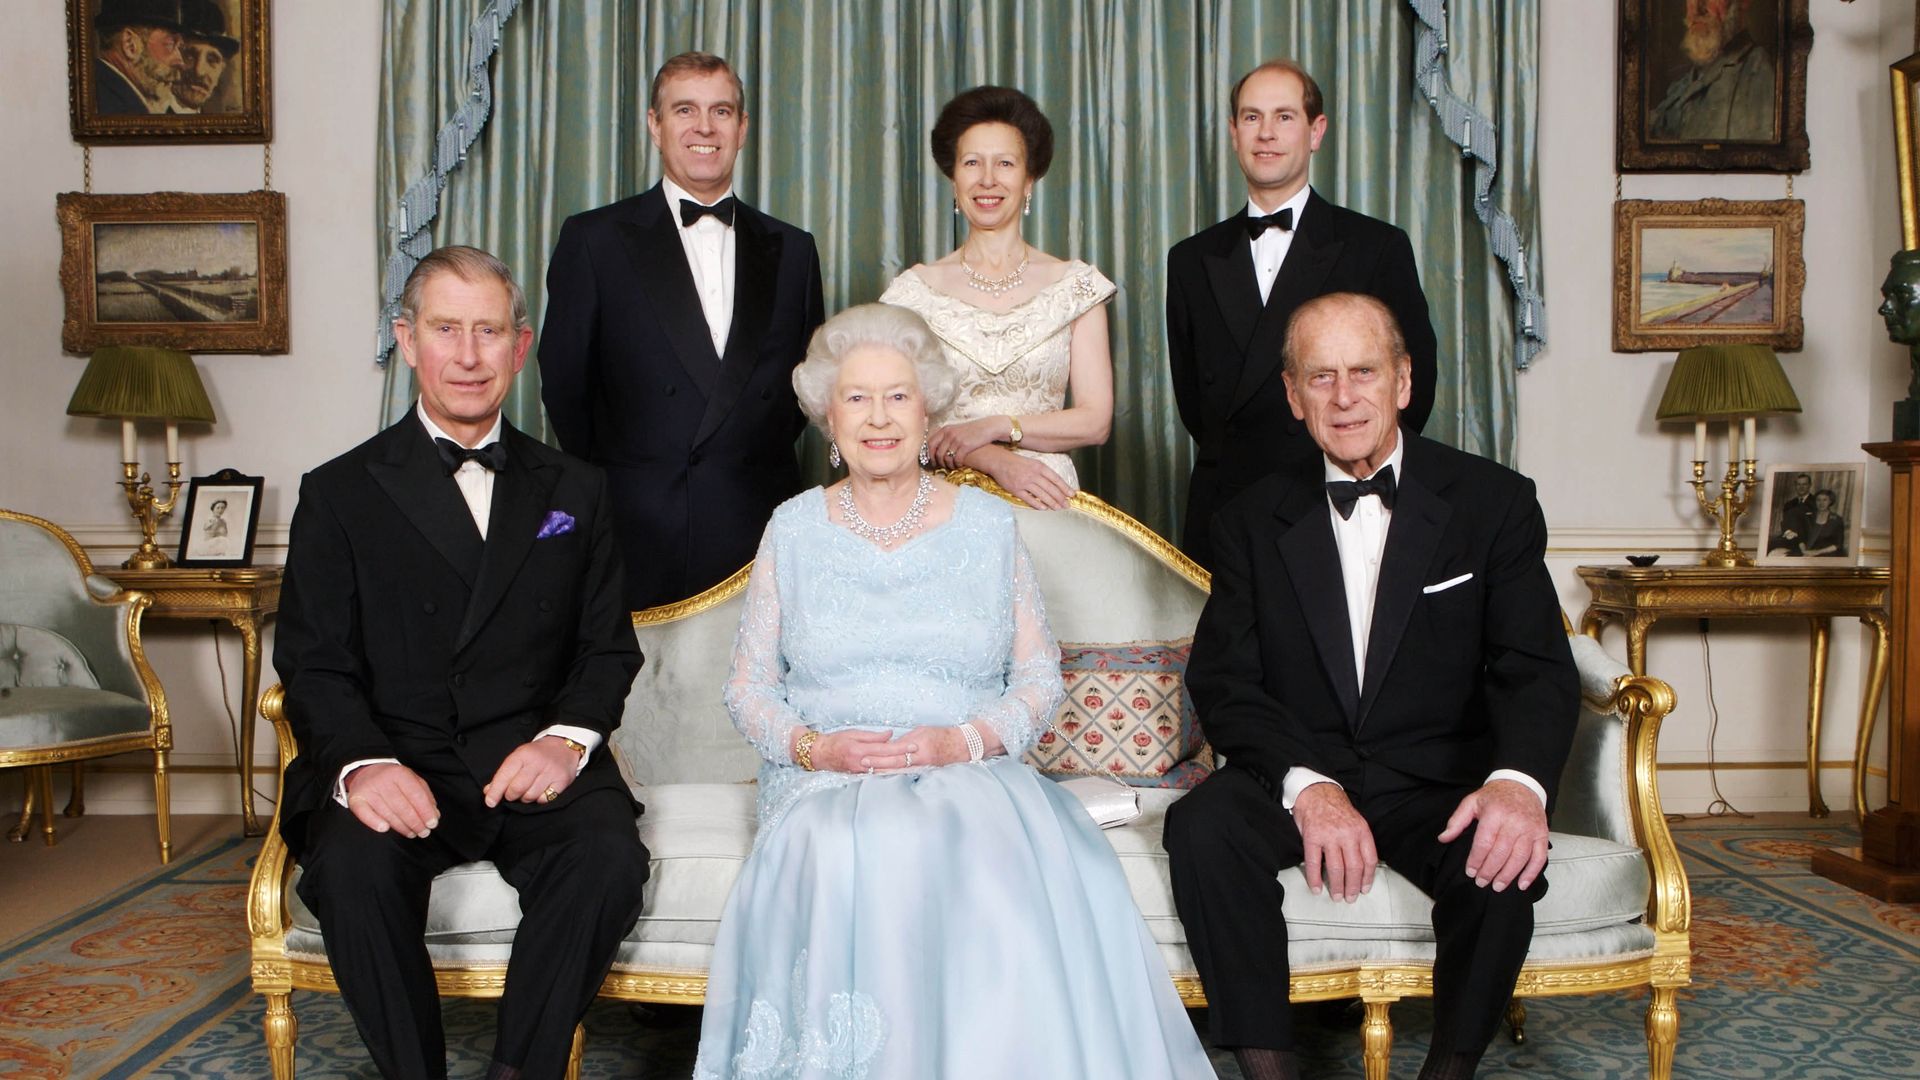 The Queen sat with Prince Charles and Prince Philip. Behind them are Prince Andrew, Princess Anne and Prince Edward